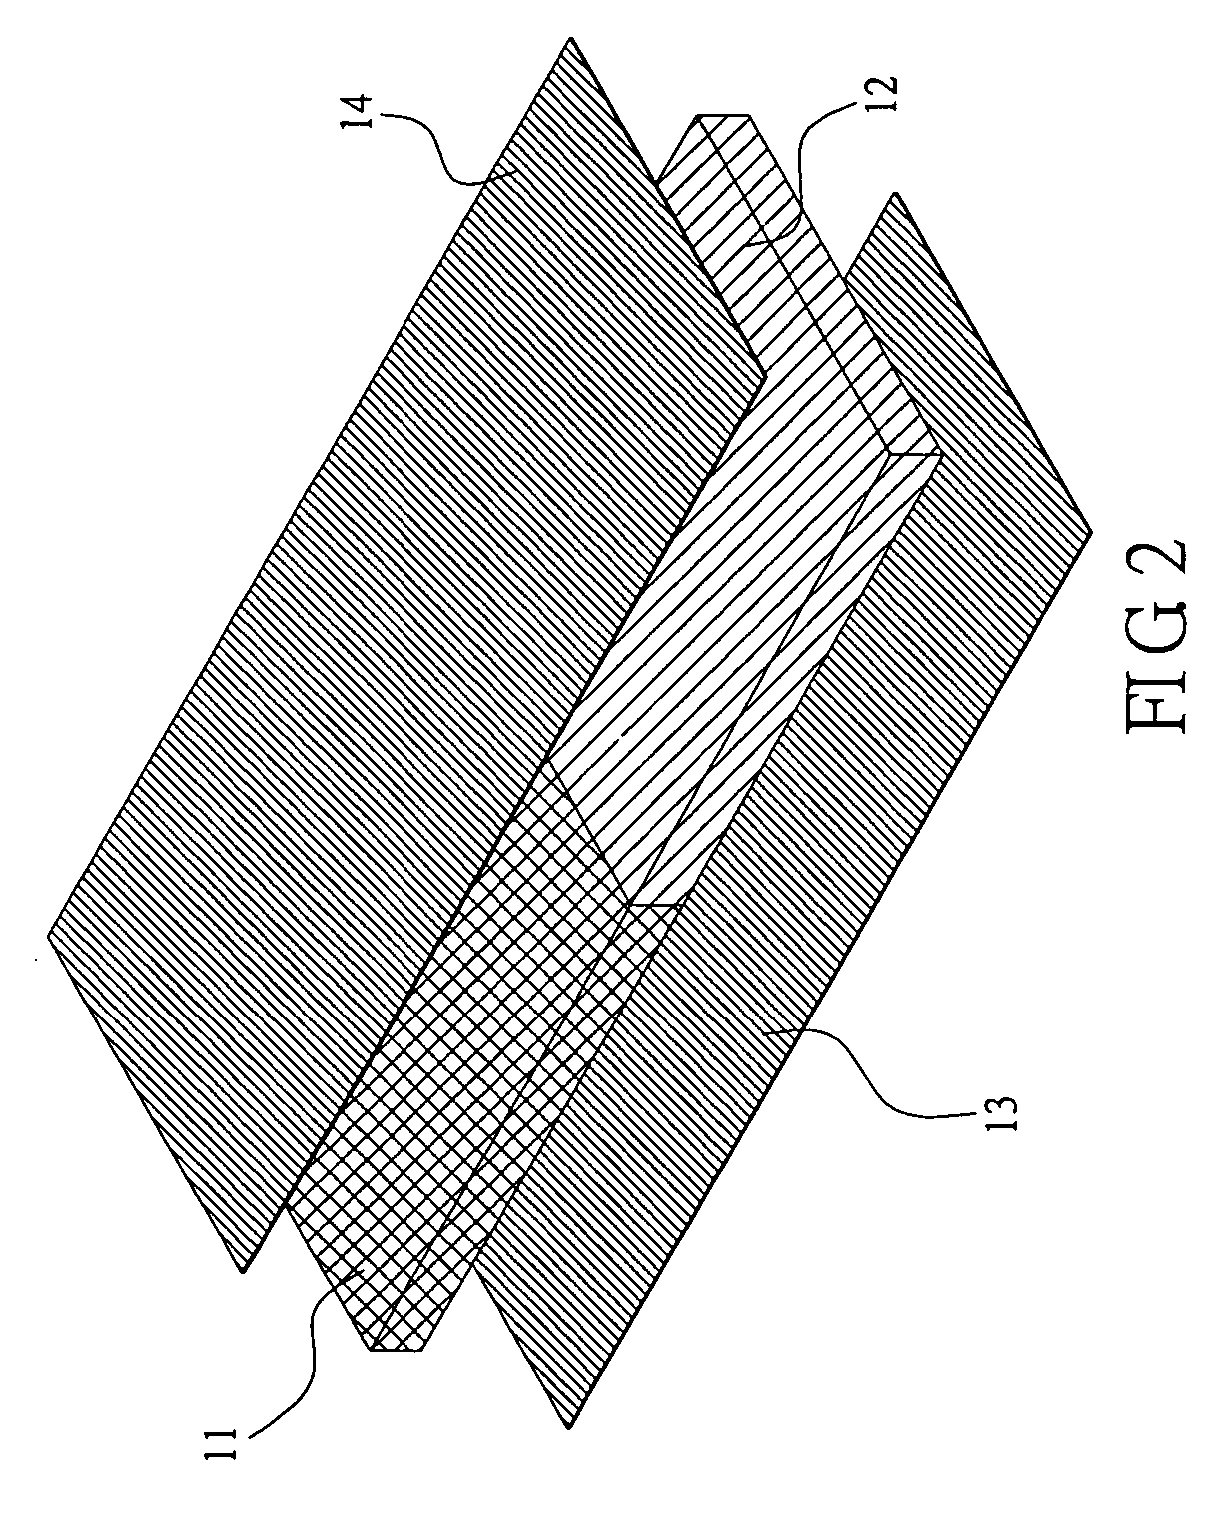 Structure of an interleaving striped capacitor substrate